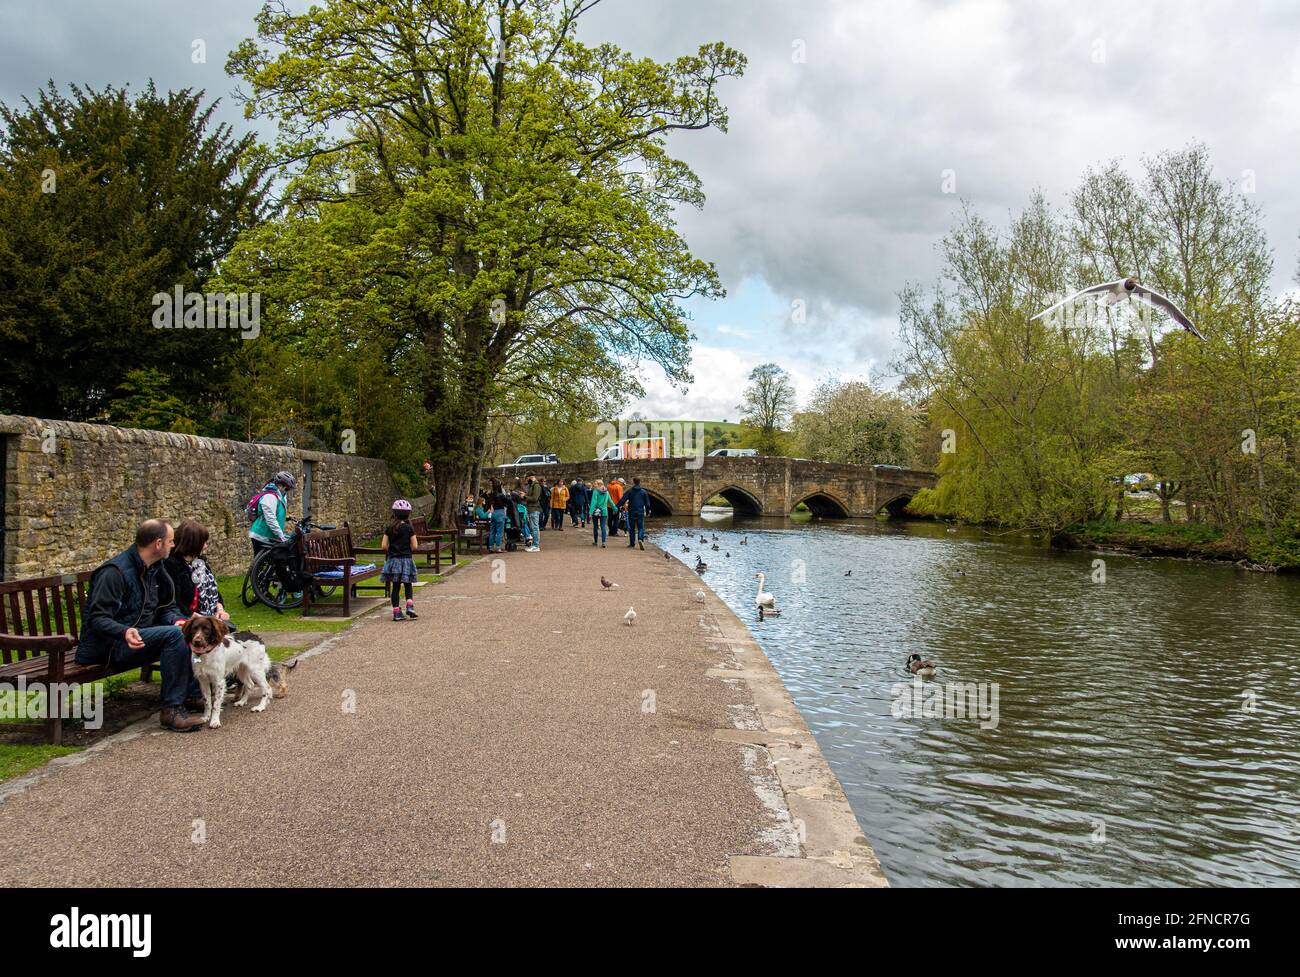 Images of tourist attraction town of Bakewell in Derbyshire home of Bakewell pudding and tart Stock Photo